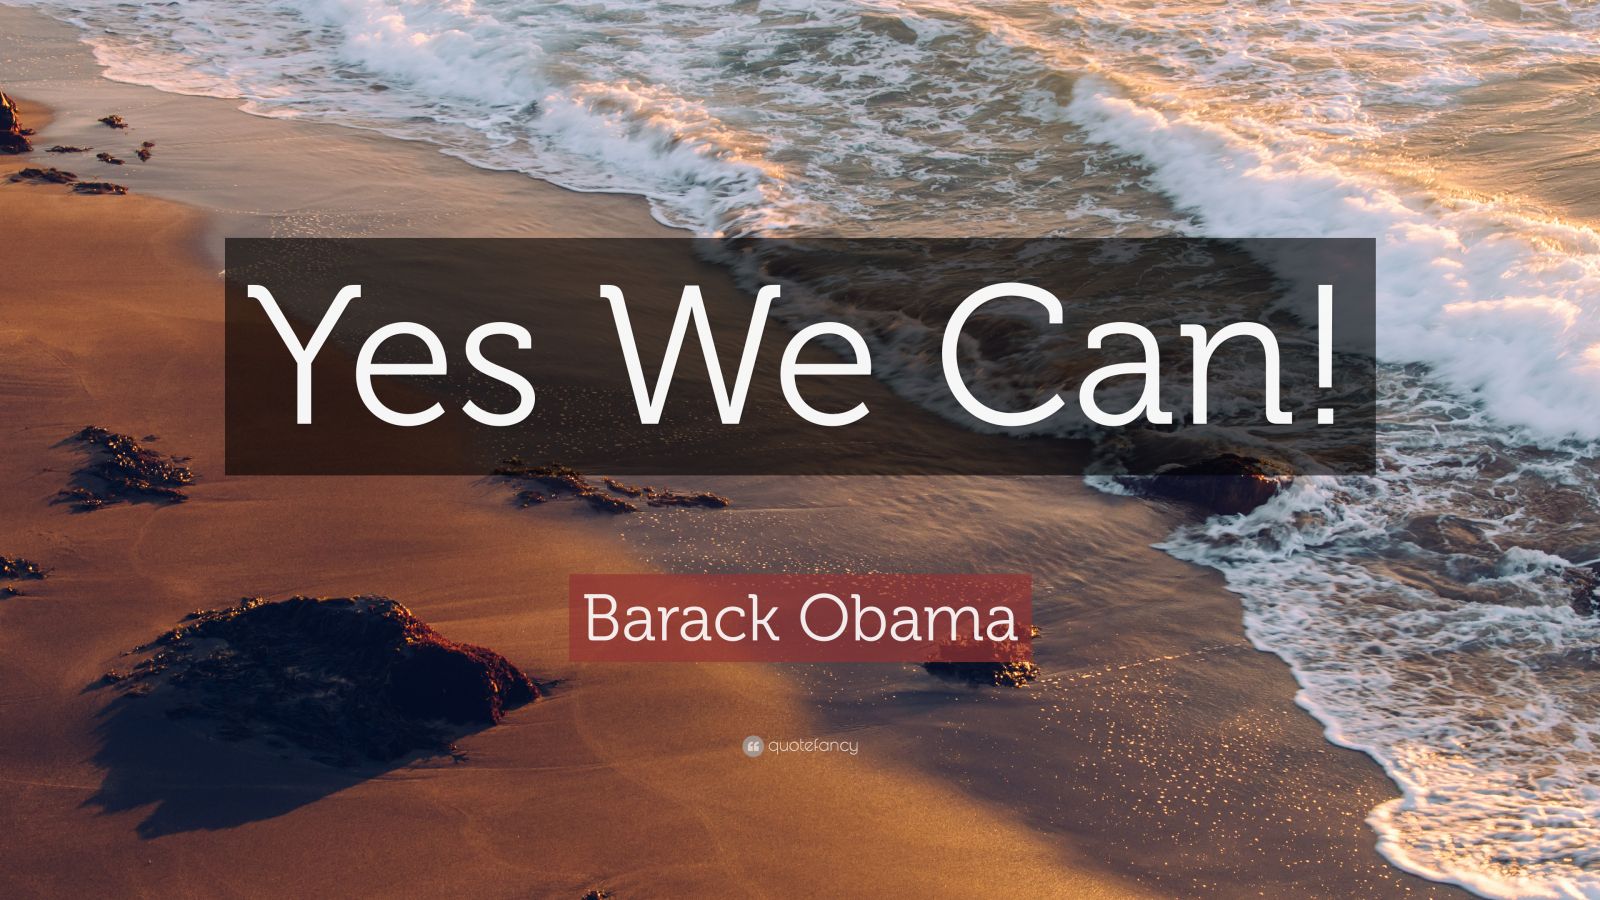 Yes, We Can! by Barack Obama